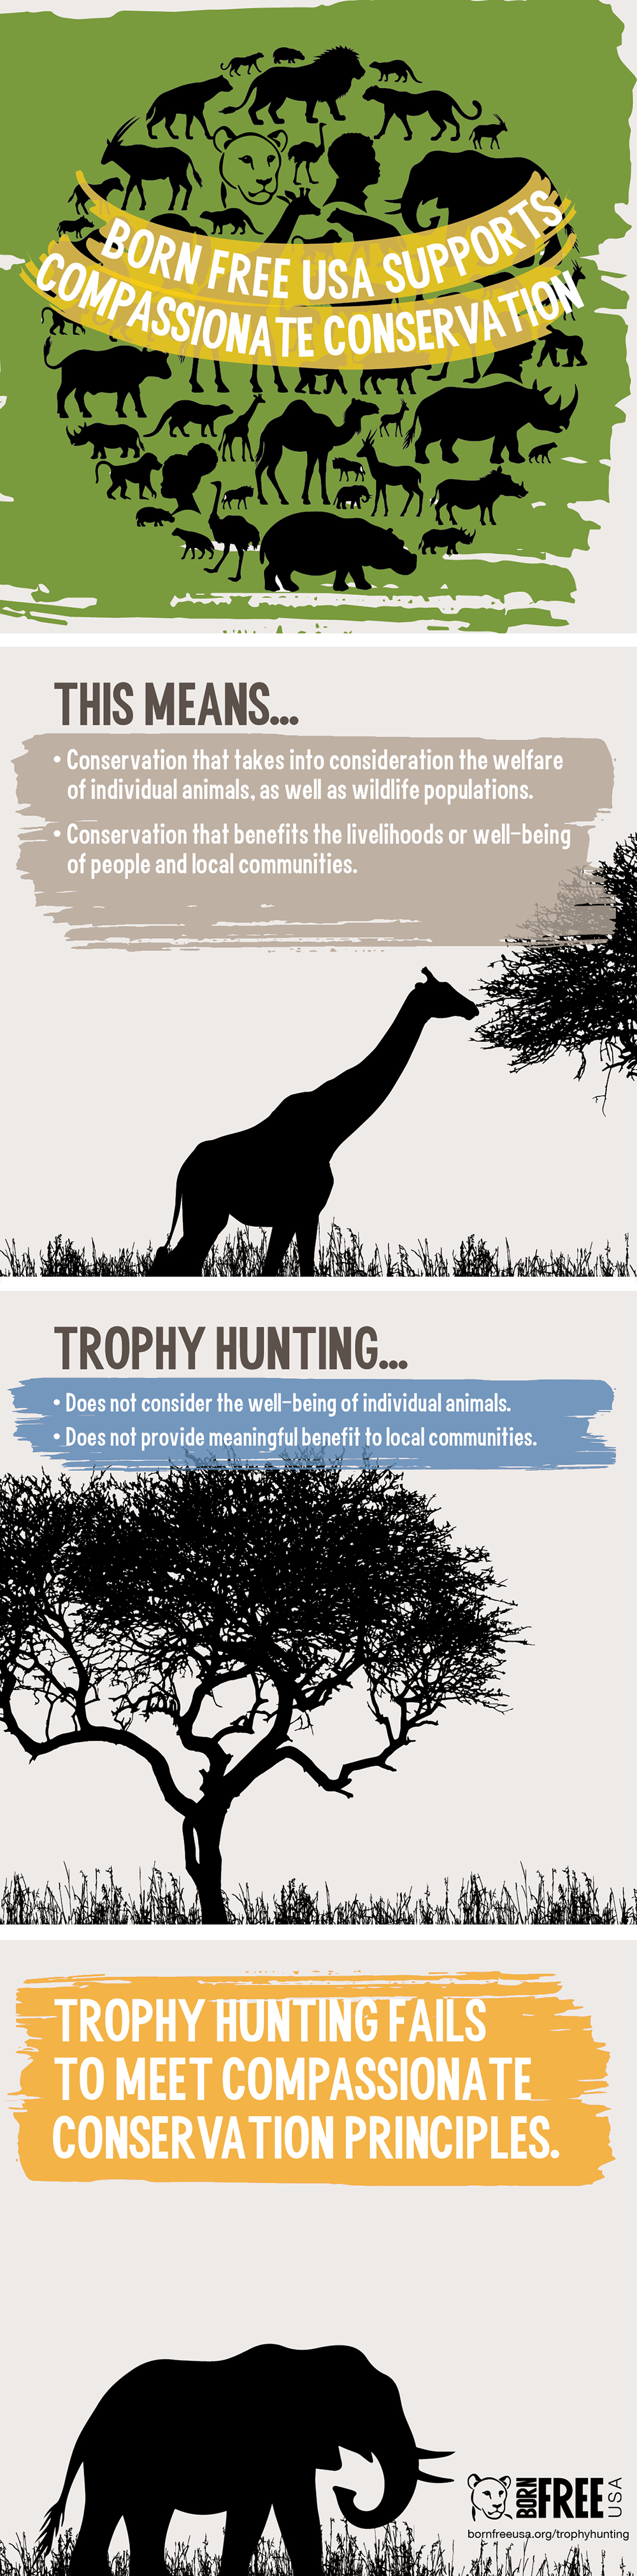 Trophy Hunting Does Not Live Up to Compassionate Conservation Principles